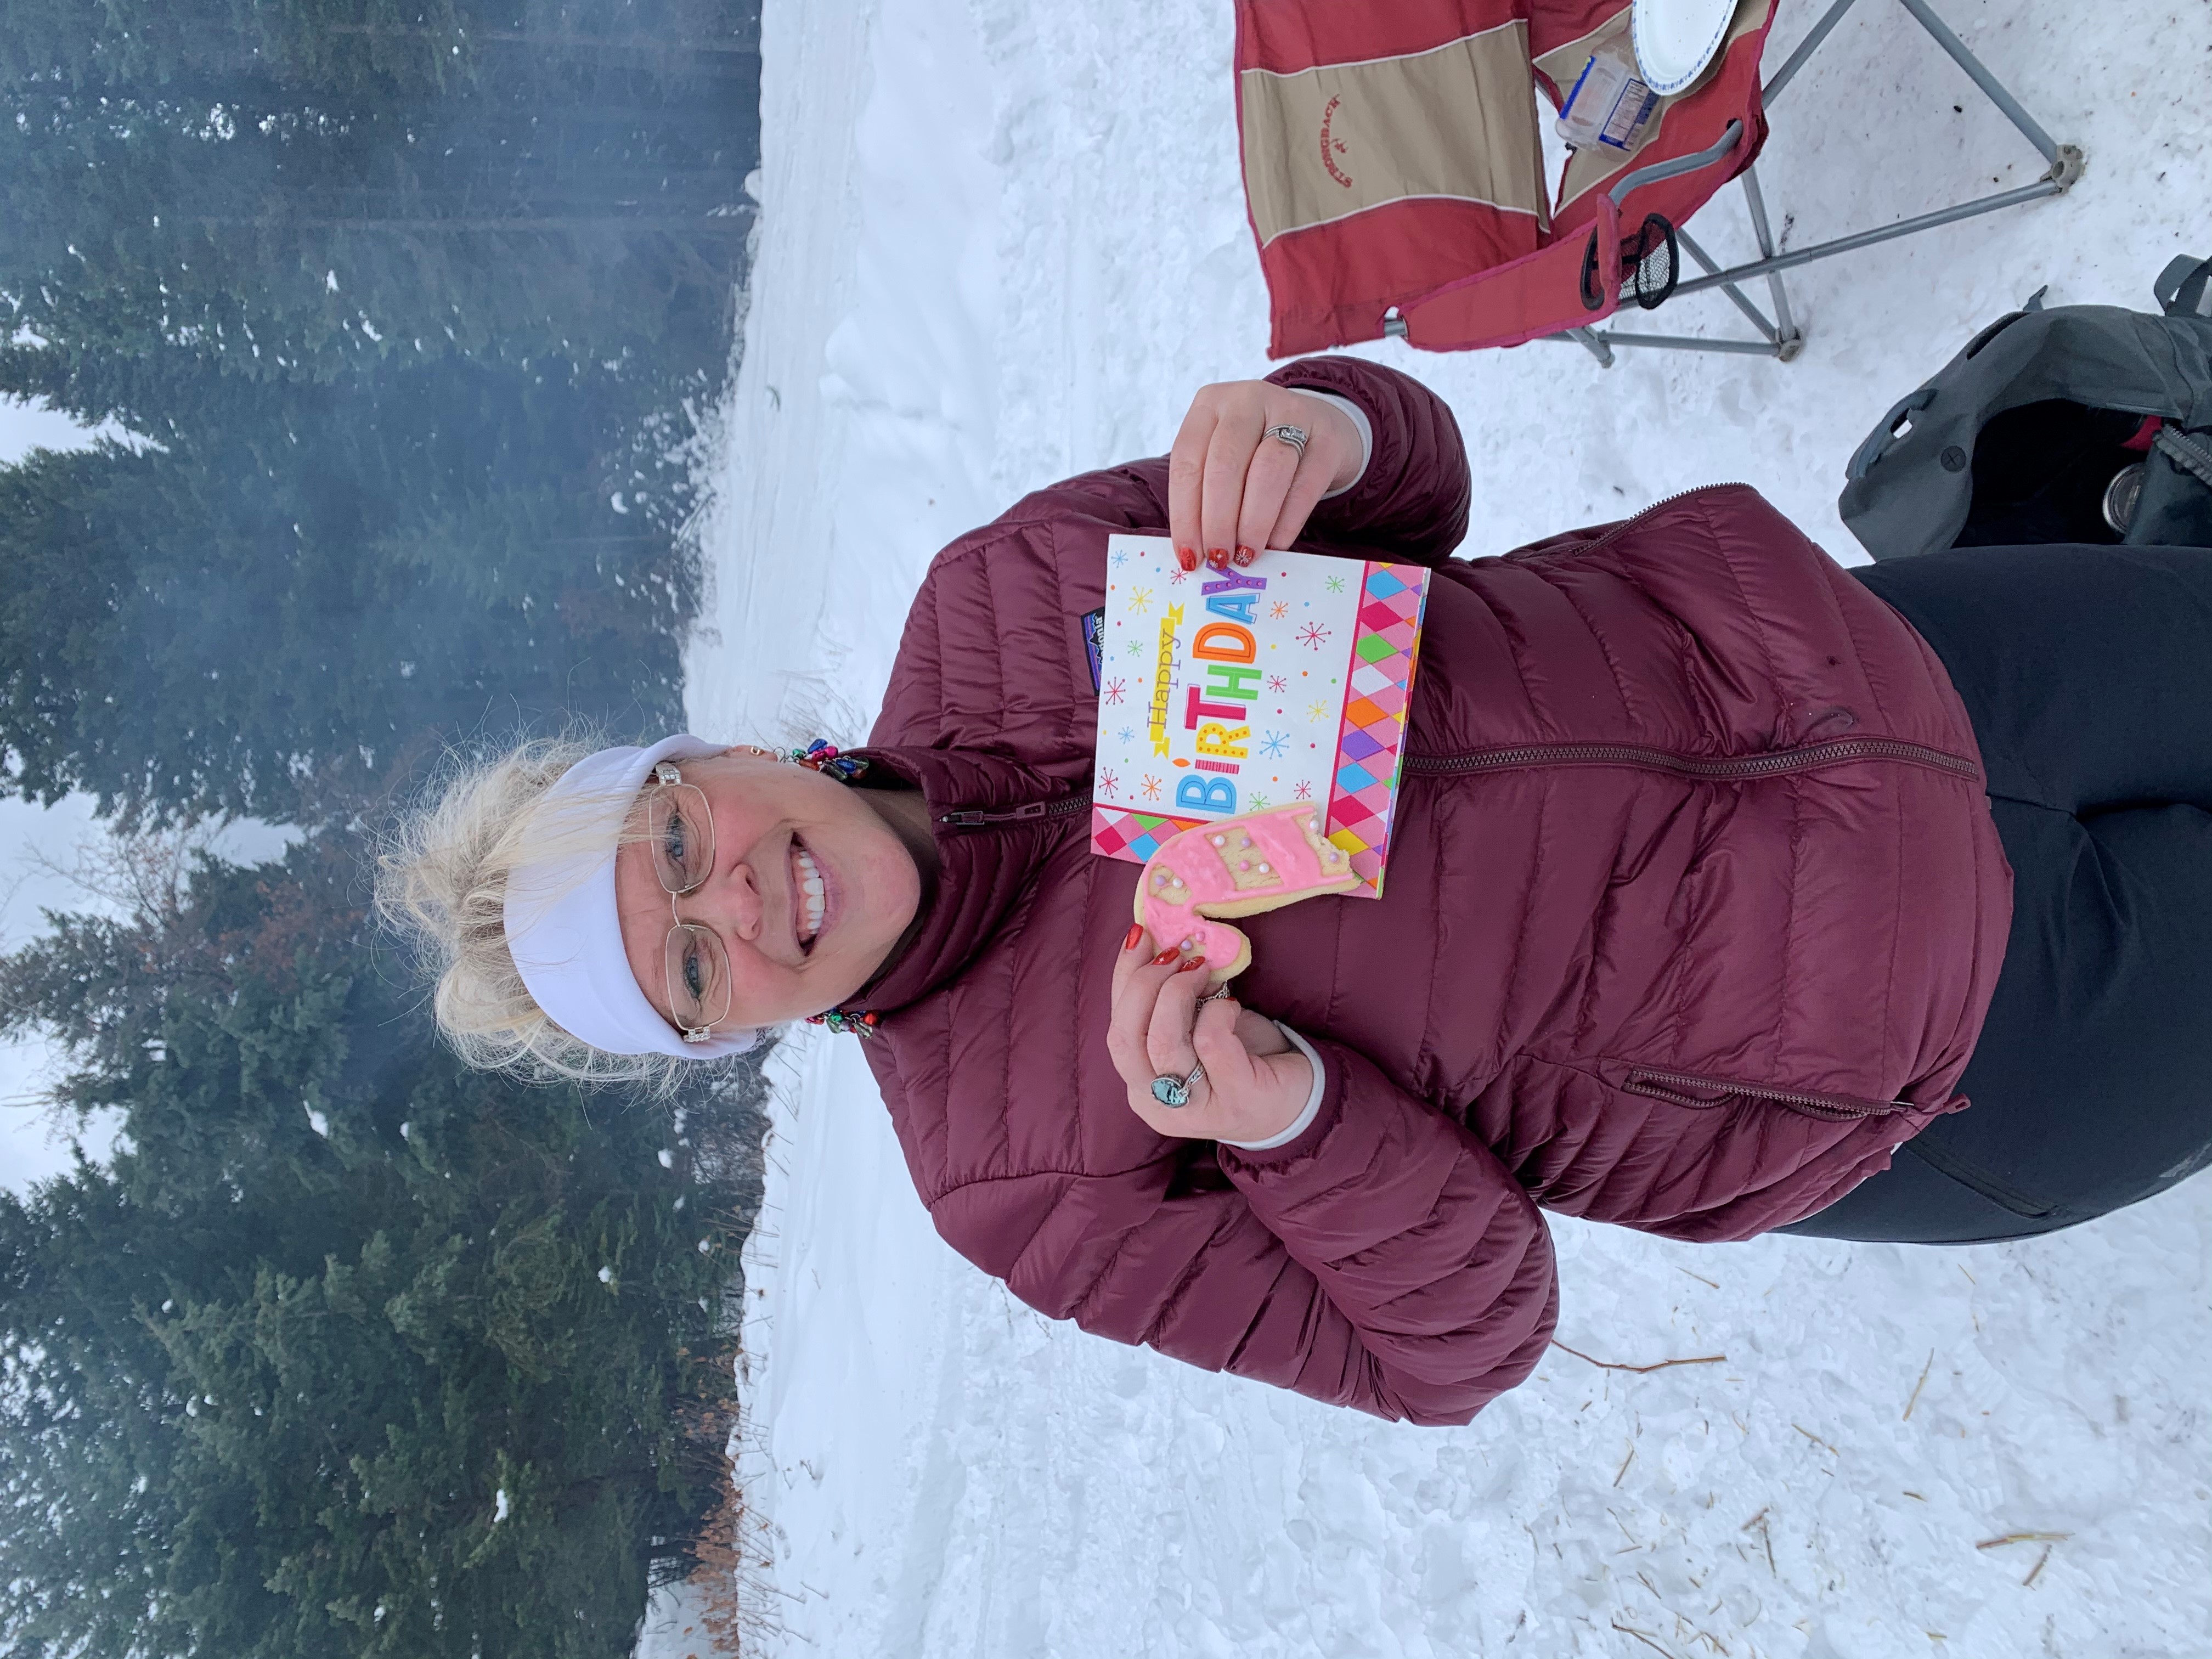 Outdoors, in the snow, a smiling woman wearing glasses, a burgundy ski jacket and a white headband, holds up a birthday card.